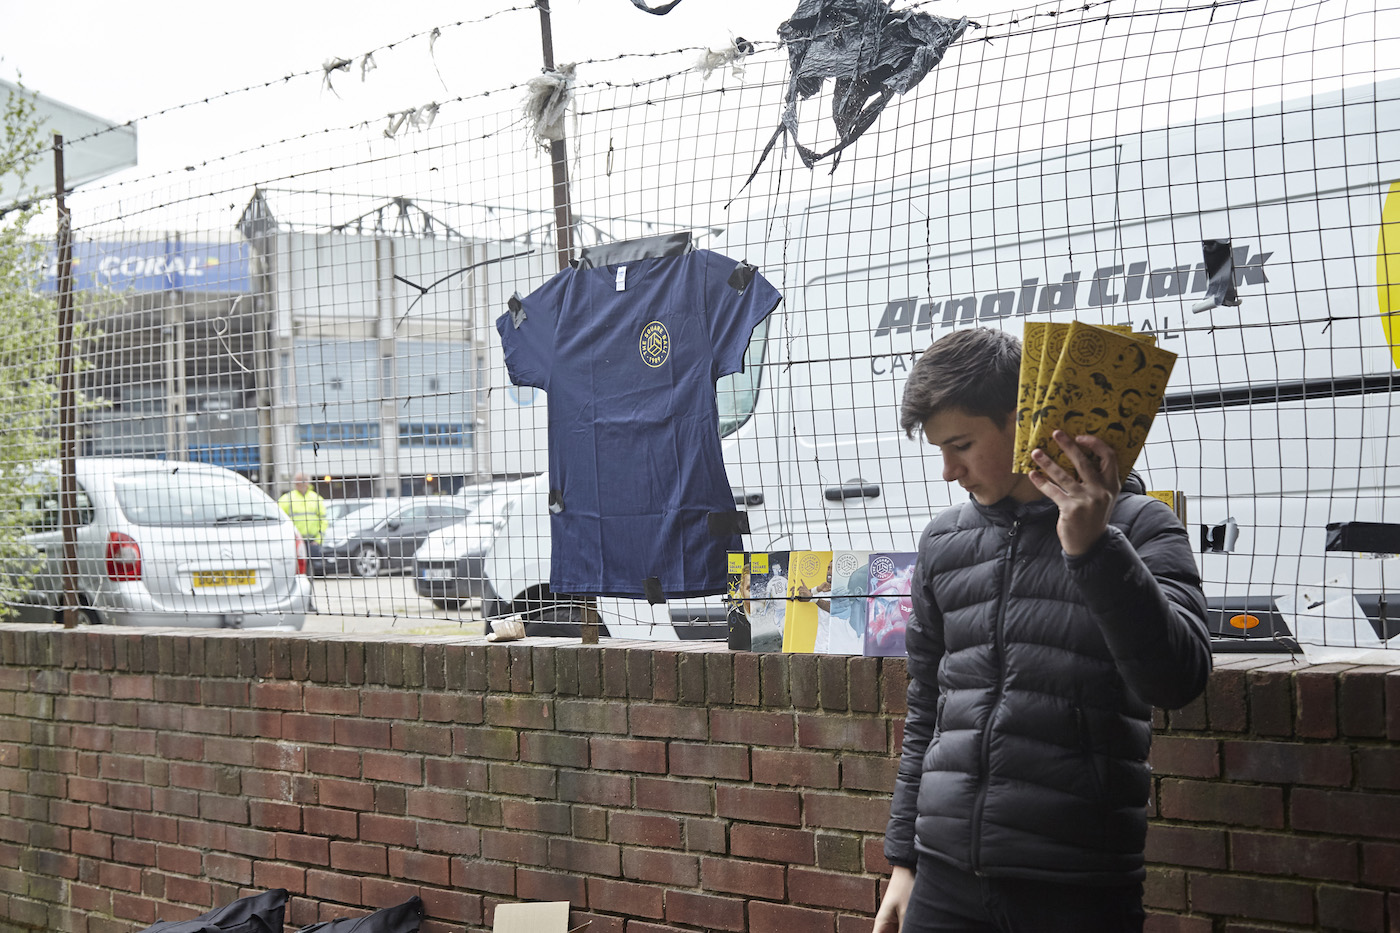 The Square Ball issues and merchandise on sale outside Elland Road.